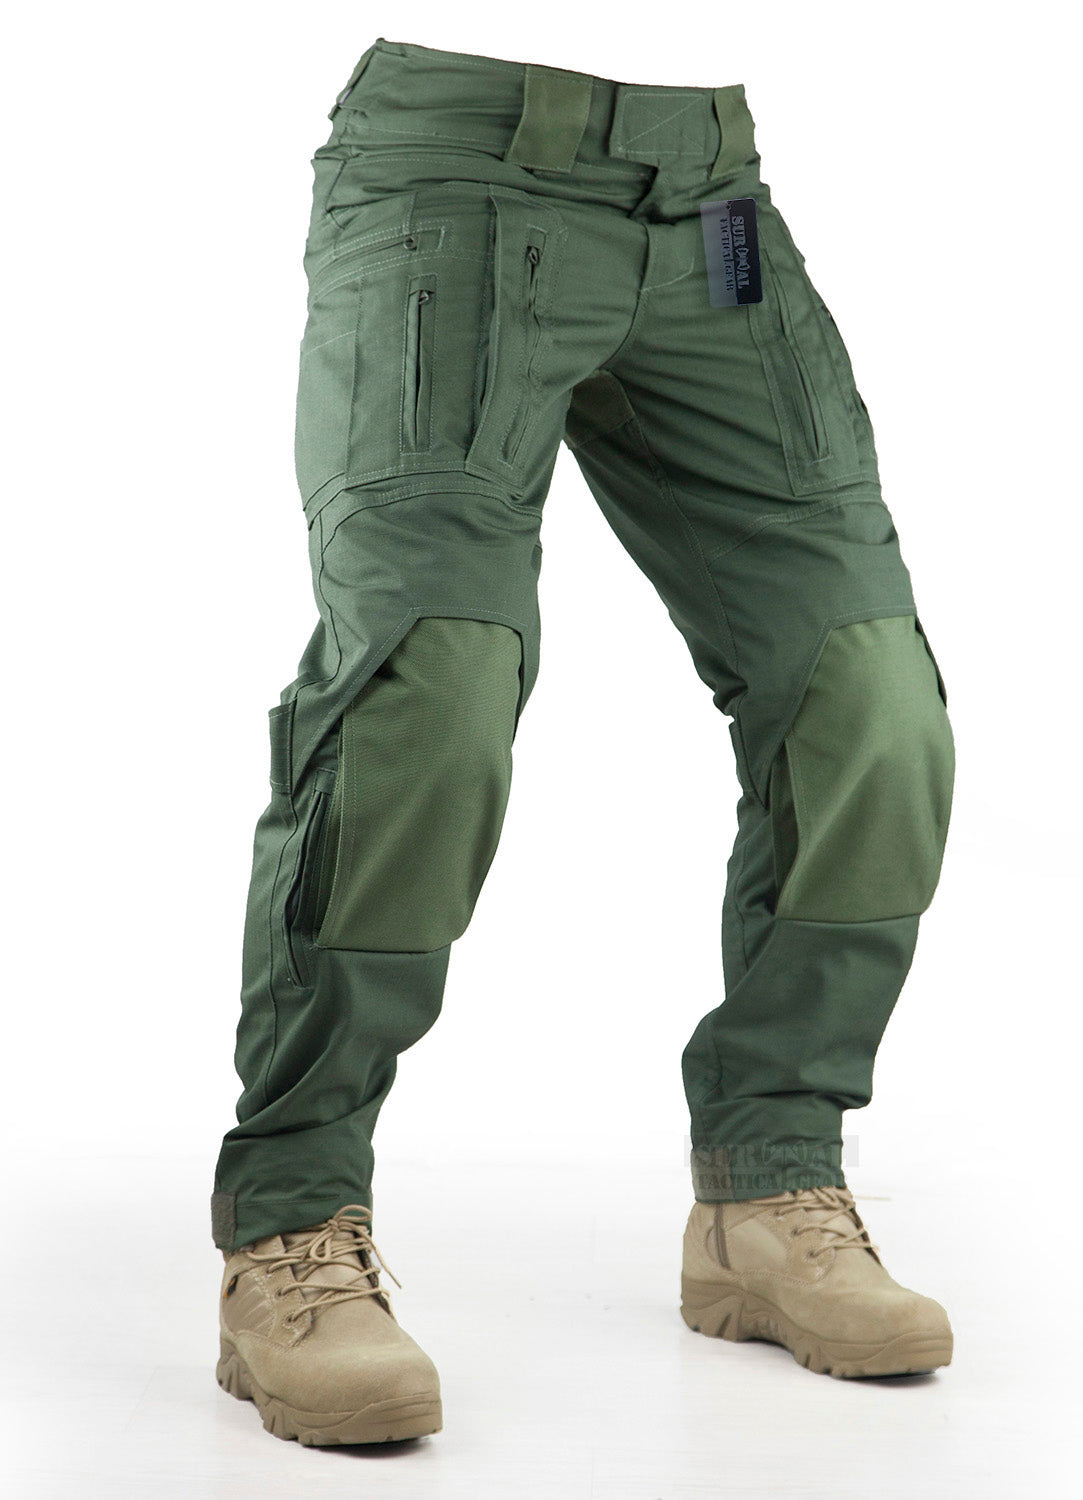 Survival Tactical Pants with Knee Pads